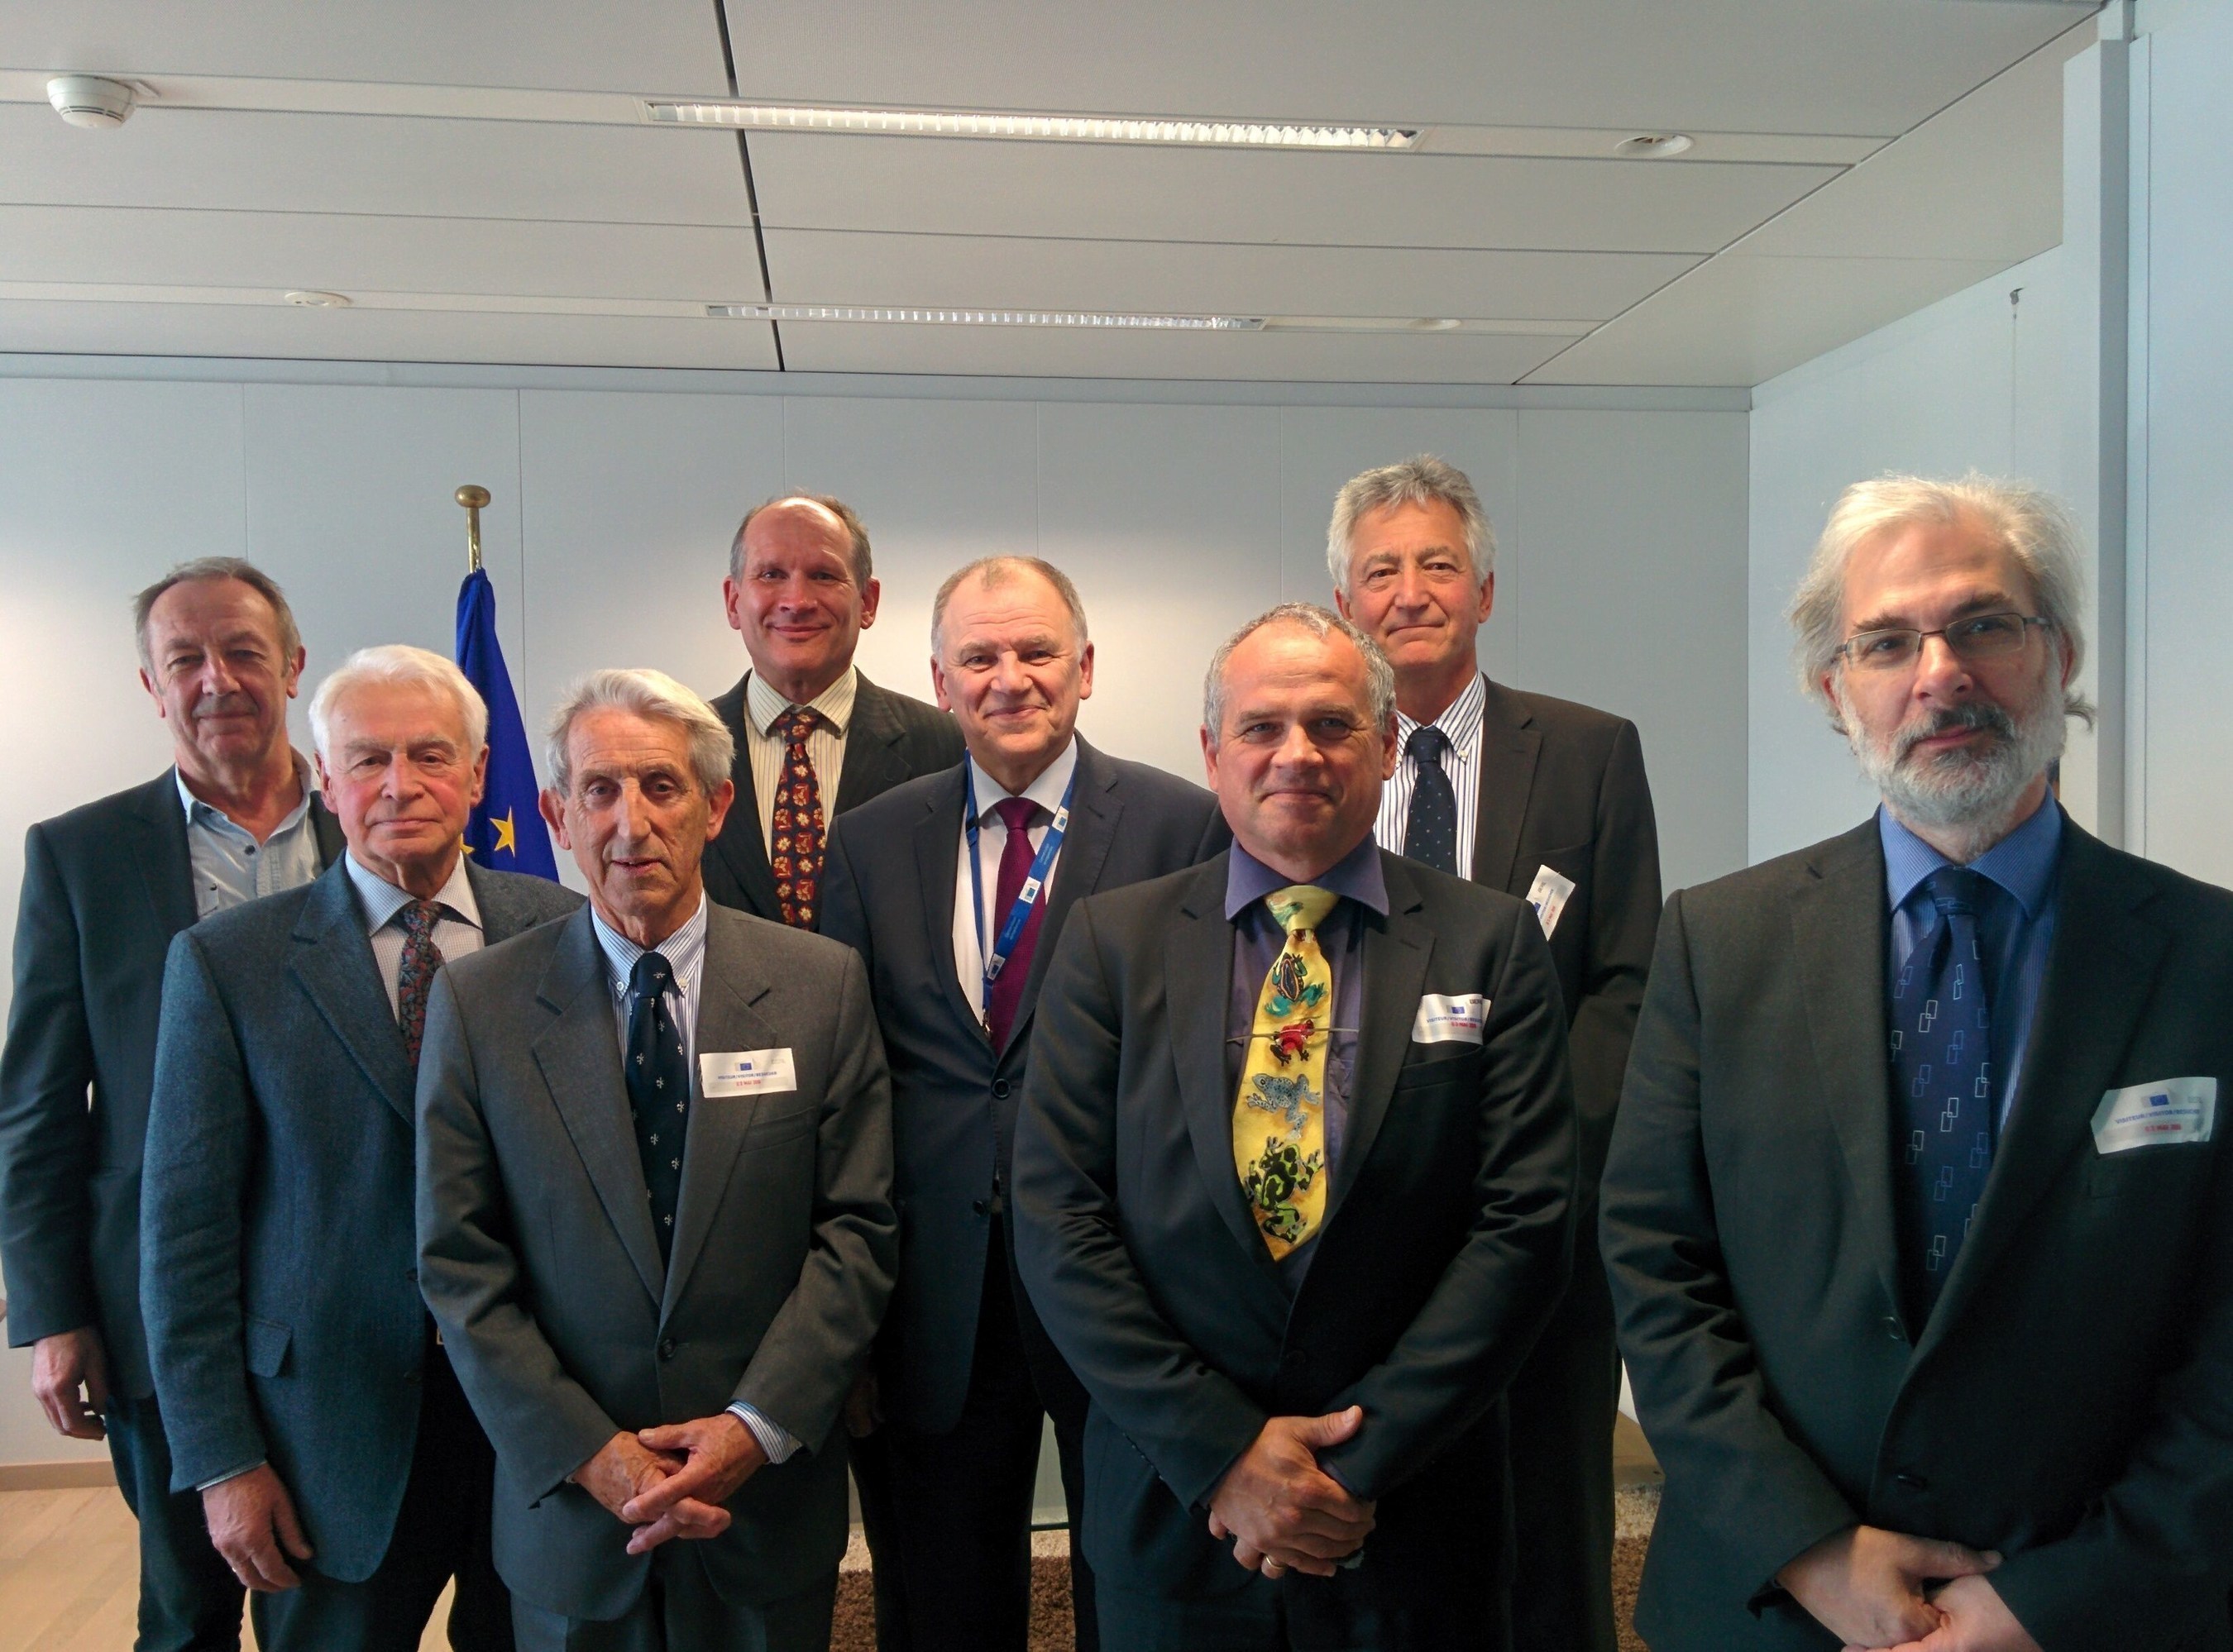 From the left: Prof. Richard Sharpe (back), Prof. Helmut Greim (middle), Prof. Sir Colin Berry (front), Prof. Pat Heslop-Harrison (back), Dr. Vytenis Andriukaitis, Commissioner of Health & Food Safety (middle), Prof. Daniel Dietrich (front), Prof. Wolfgang Dekant (back), and Prof. Alan Boobis (front) in Bruxelles, May 3rd 2016 (PRNewsFoto/University of Konstanz)